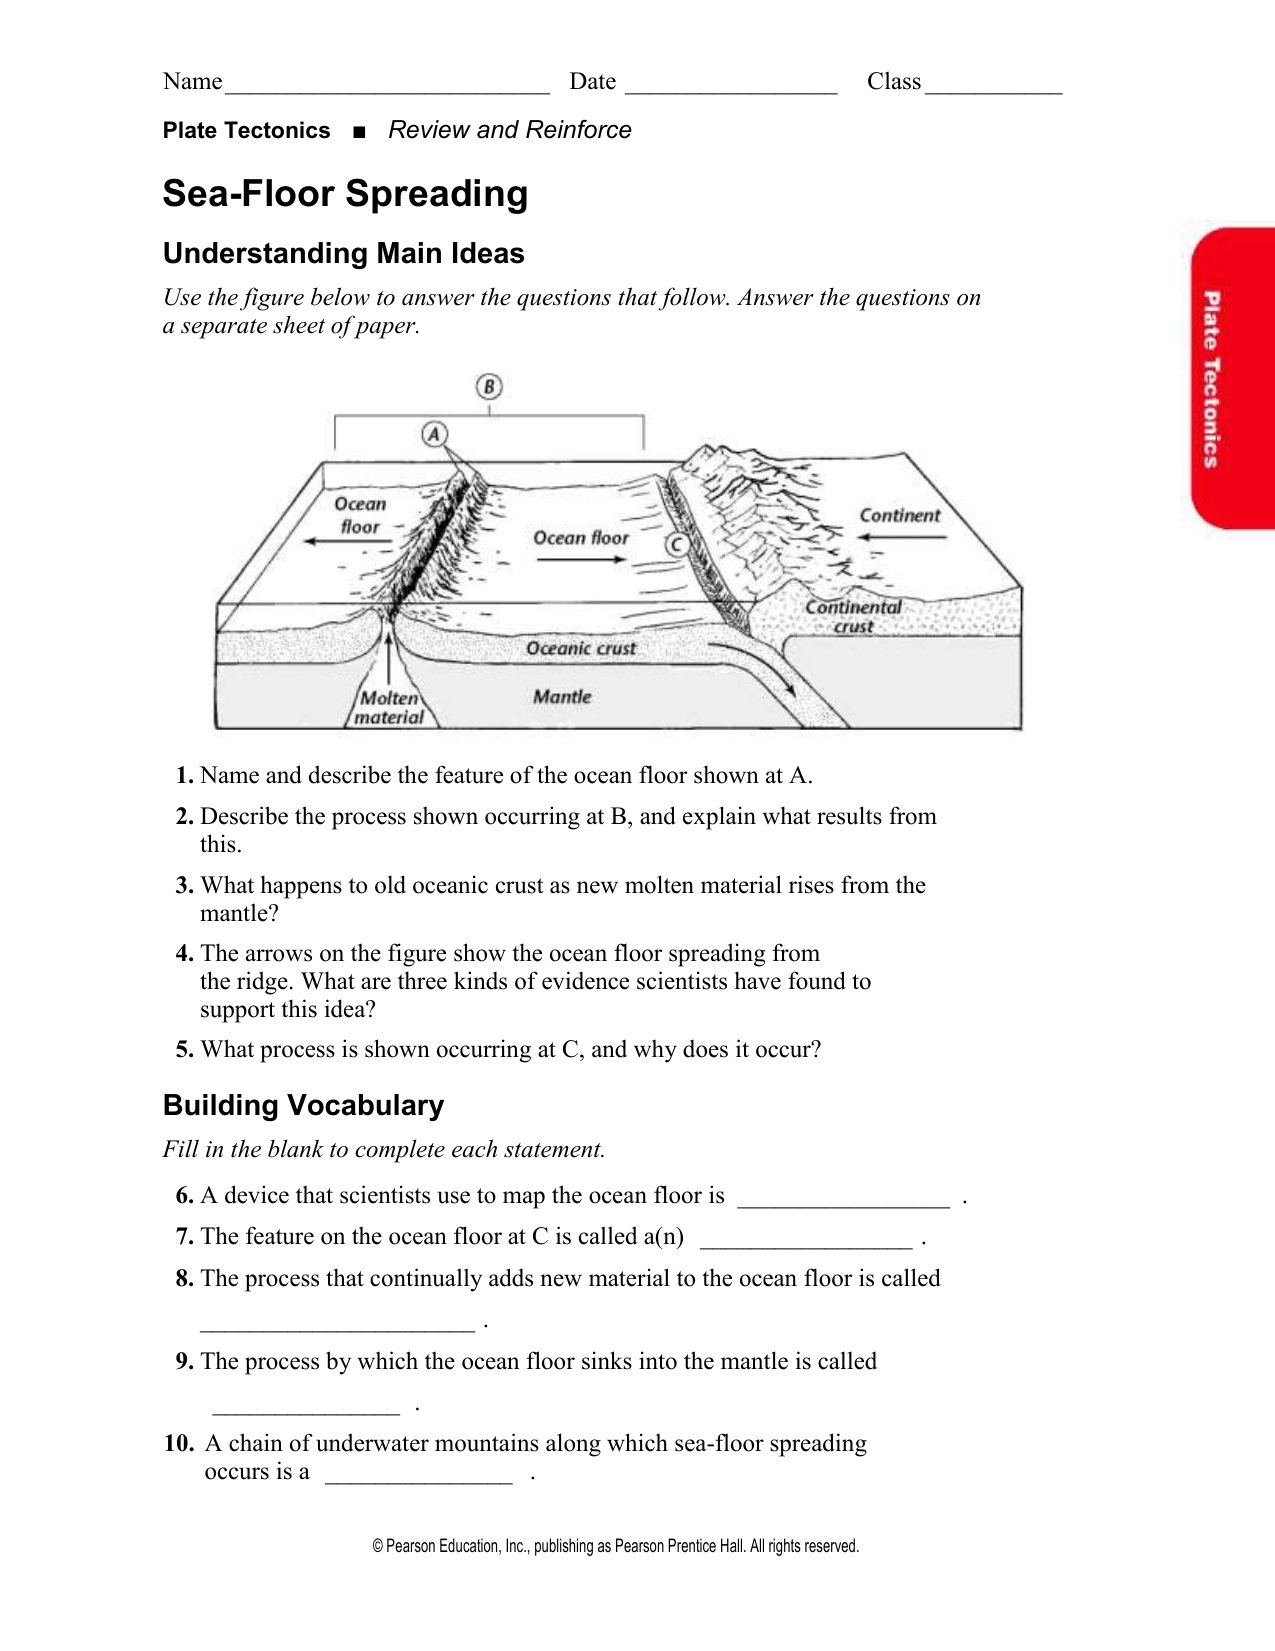 8 Pics Sea Floor Spreading Worksheet Answer Key Pearson Education And